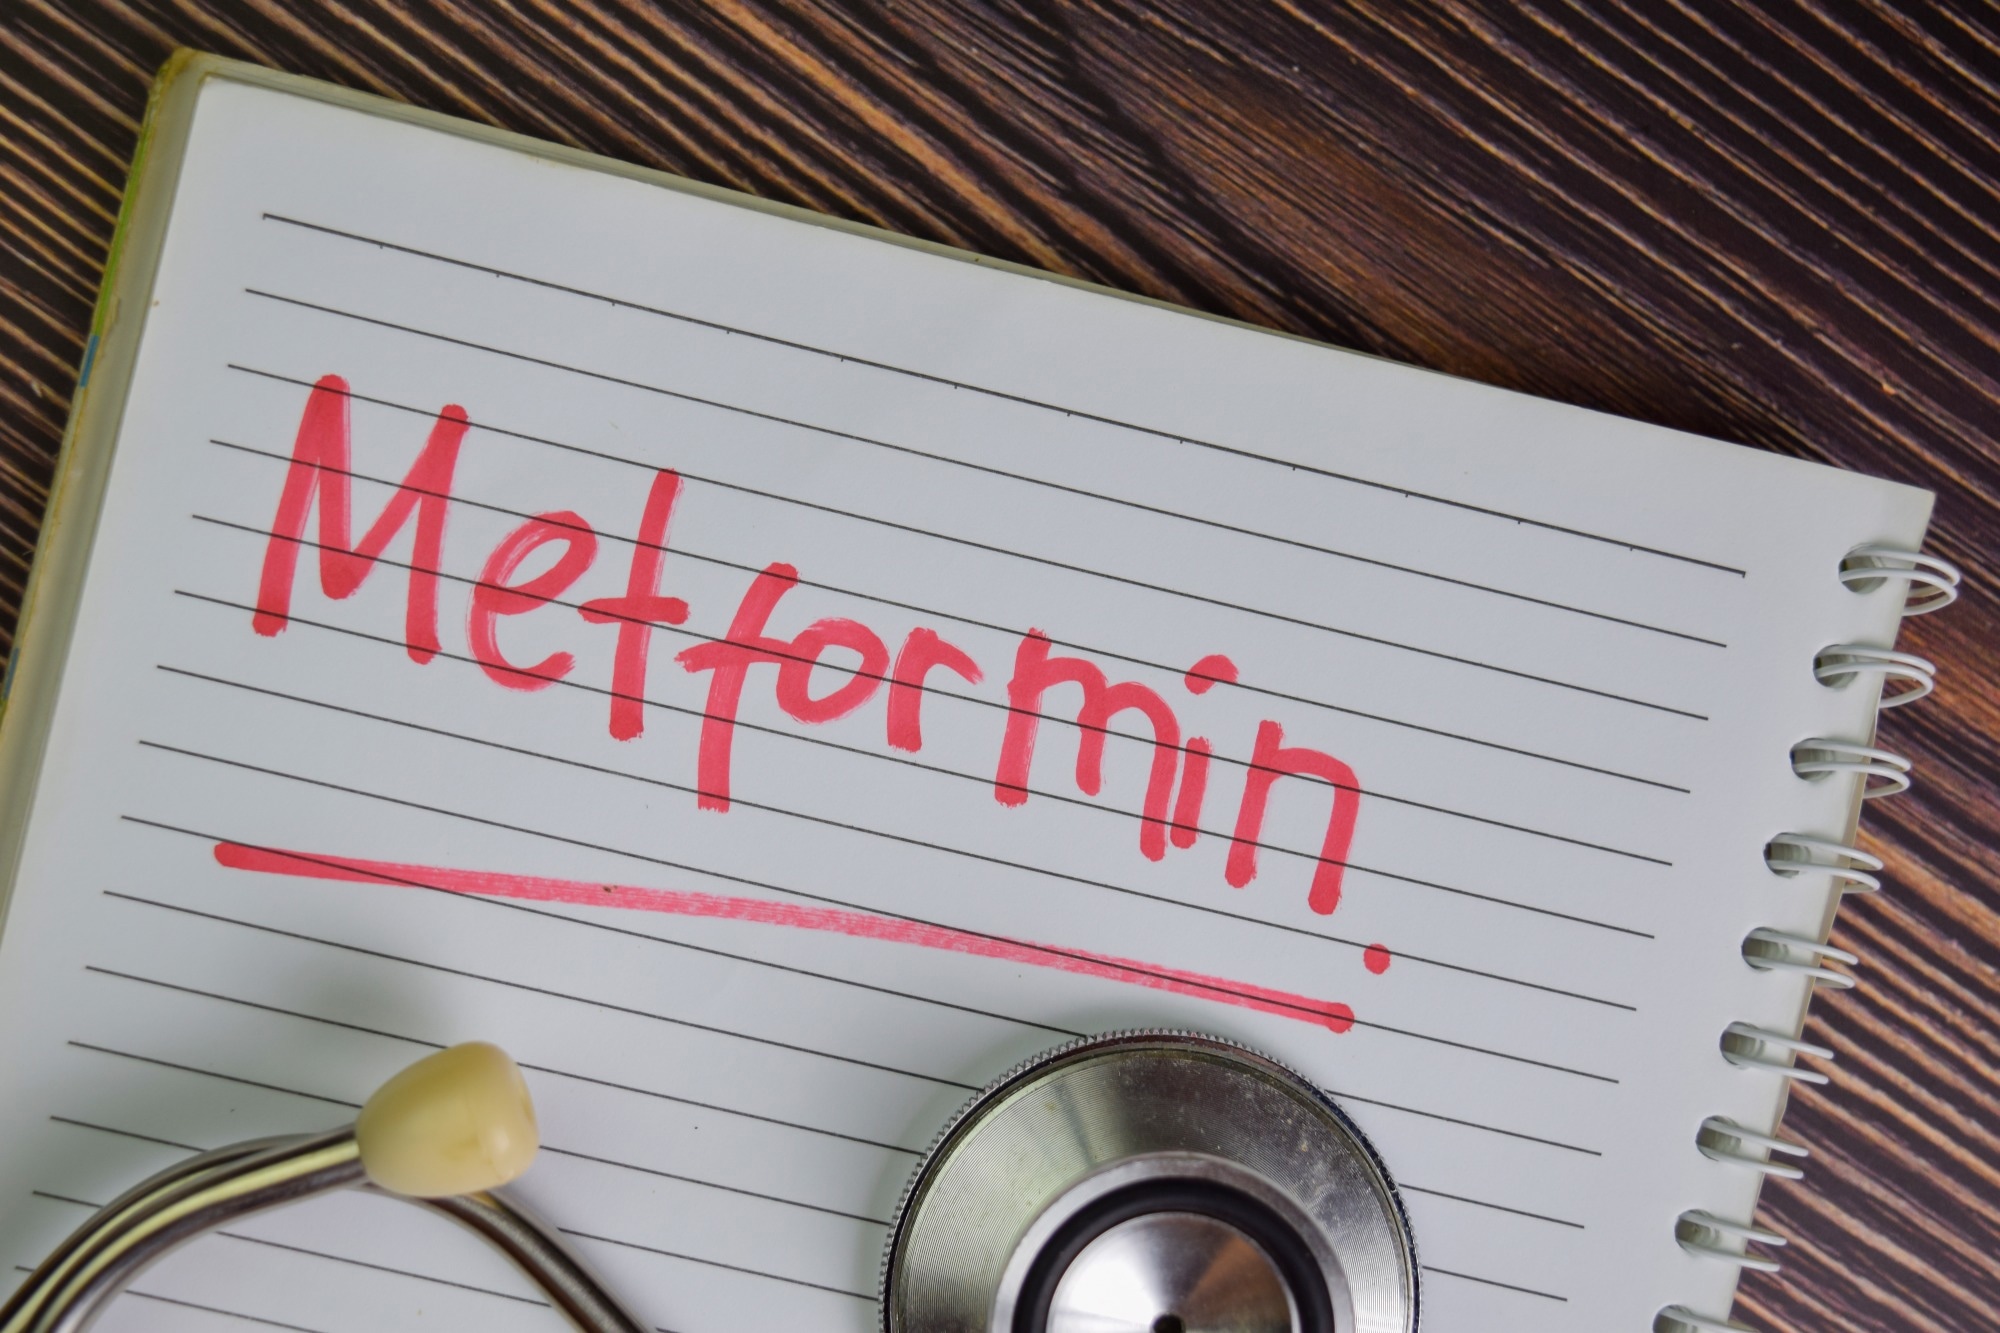 Study: Metformin in SARS-CoV-2 infection: A hidden path – from altered inflammation to reduced mortality. A review from the literature. Image Credit: bangoland/Shutterstock